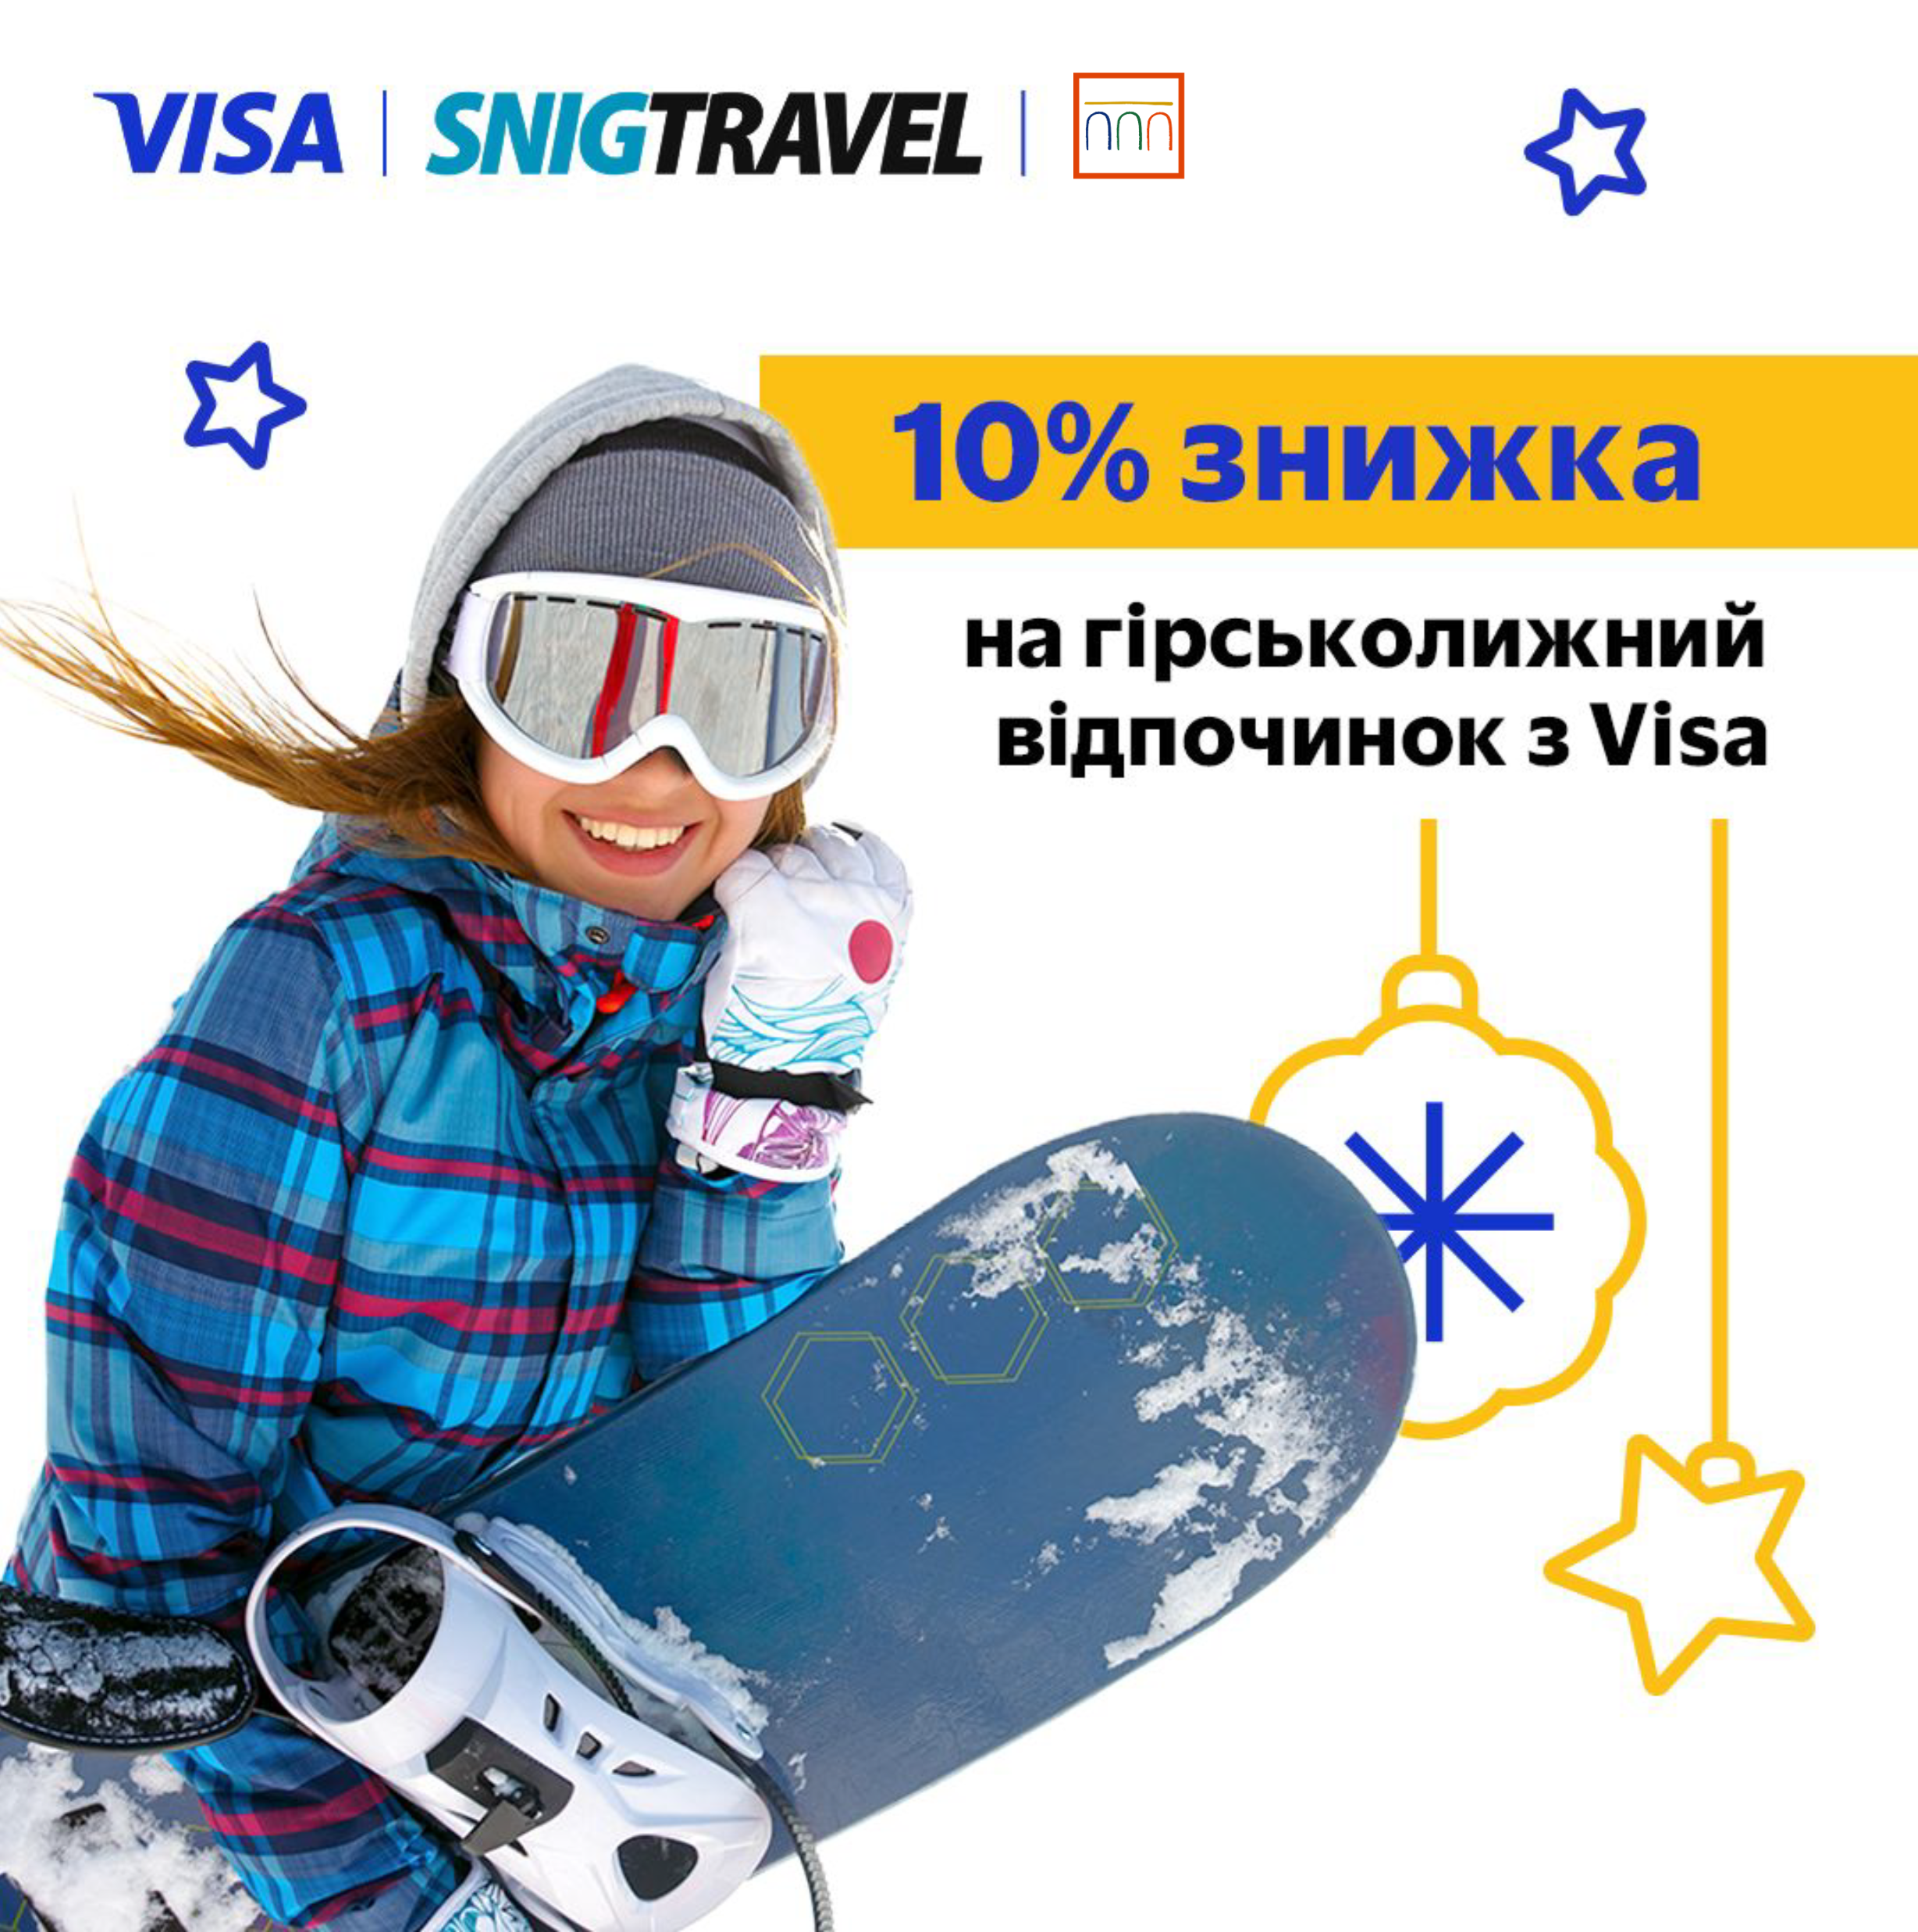 10% discount on holidays with Snigtravel and Visa